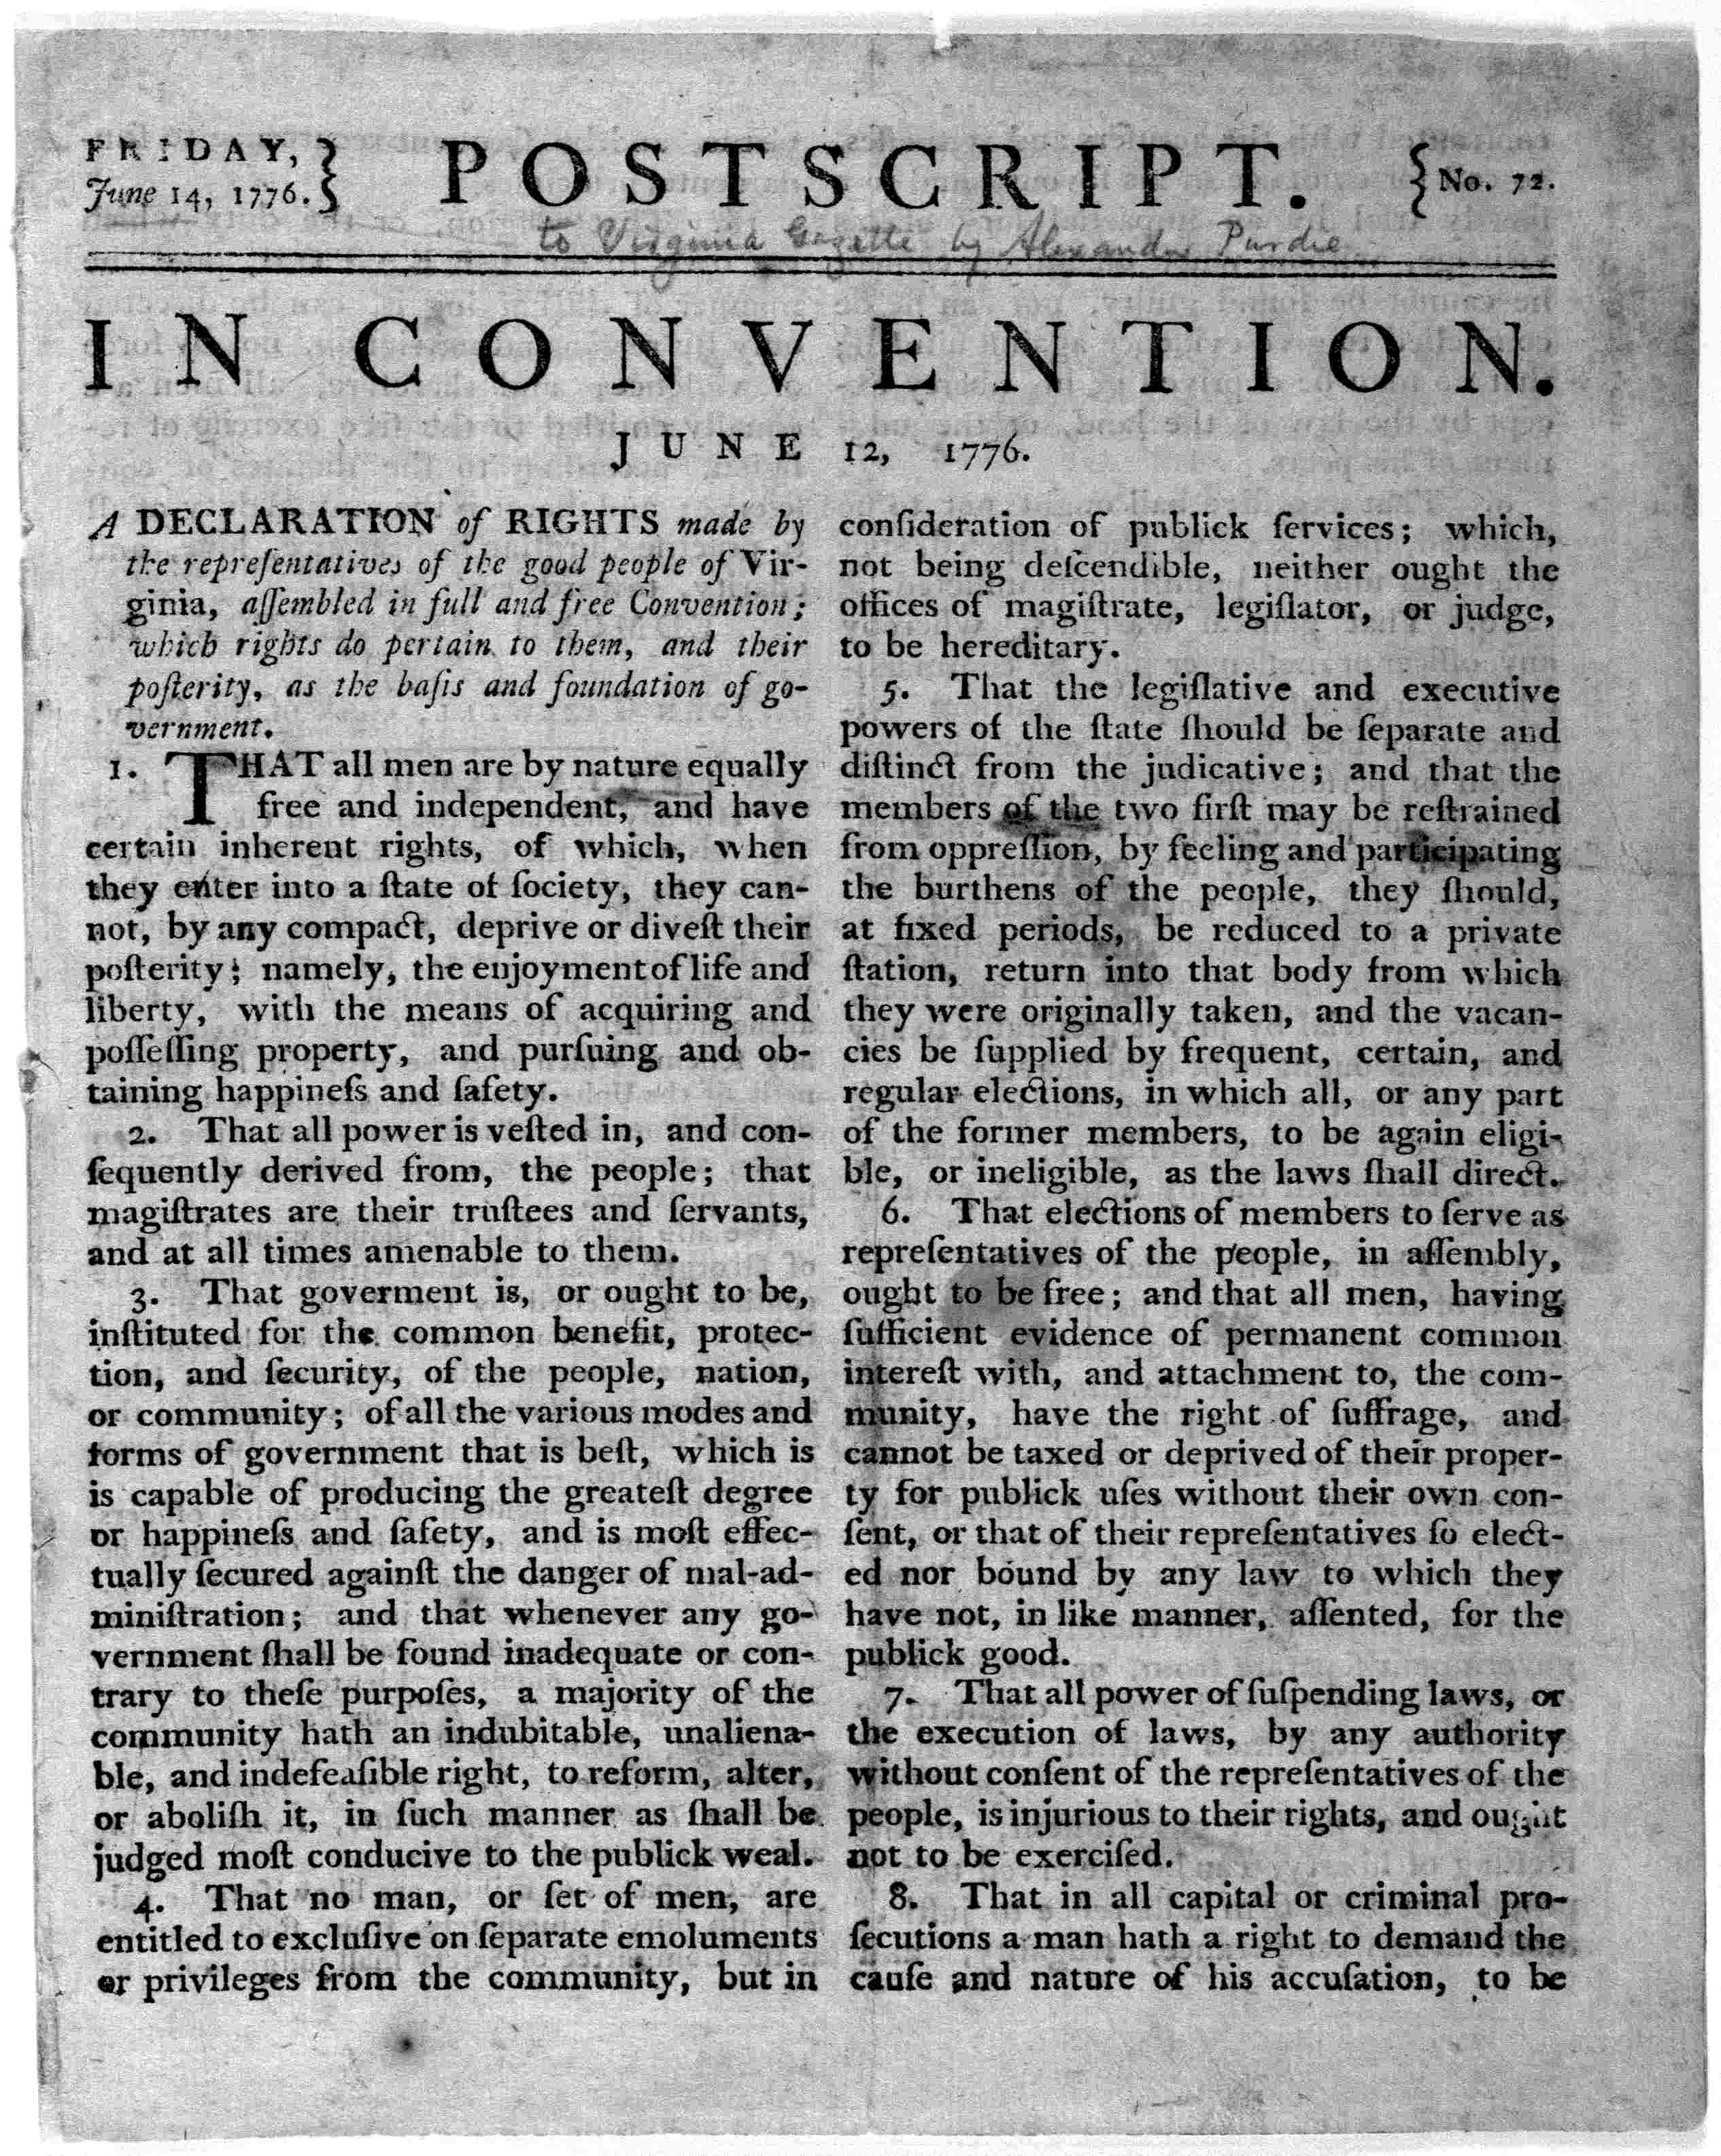 Virginia Declaration of Rights, 1776 | State Historical Society of Iowa